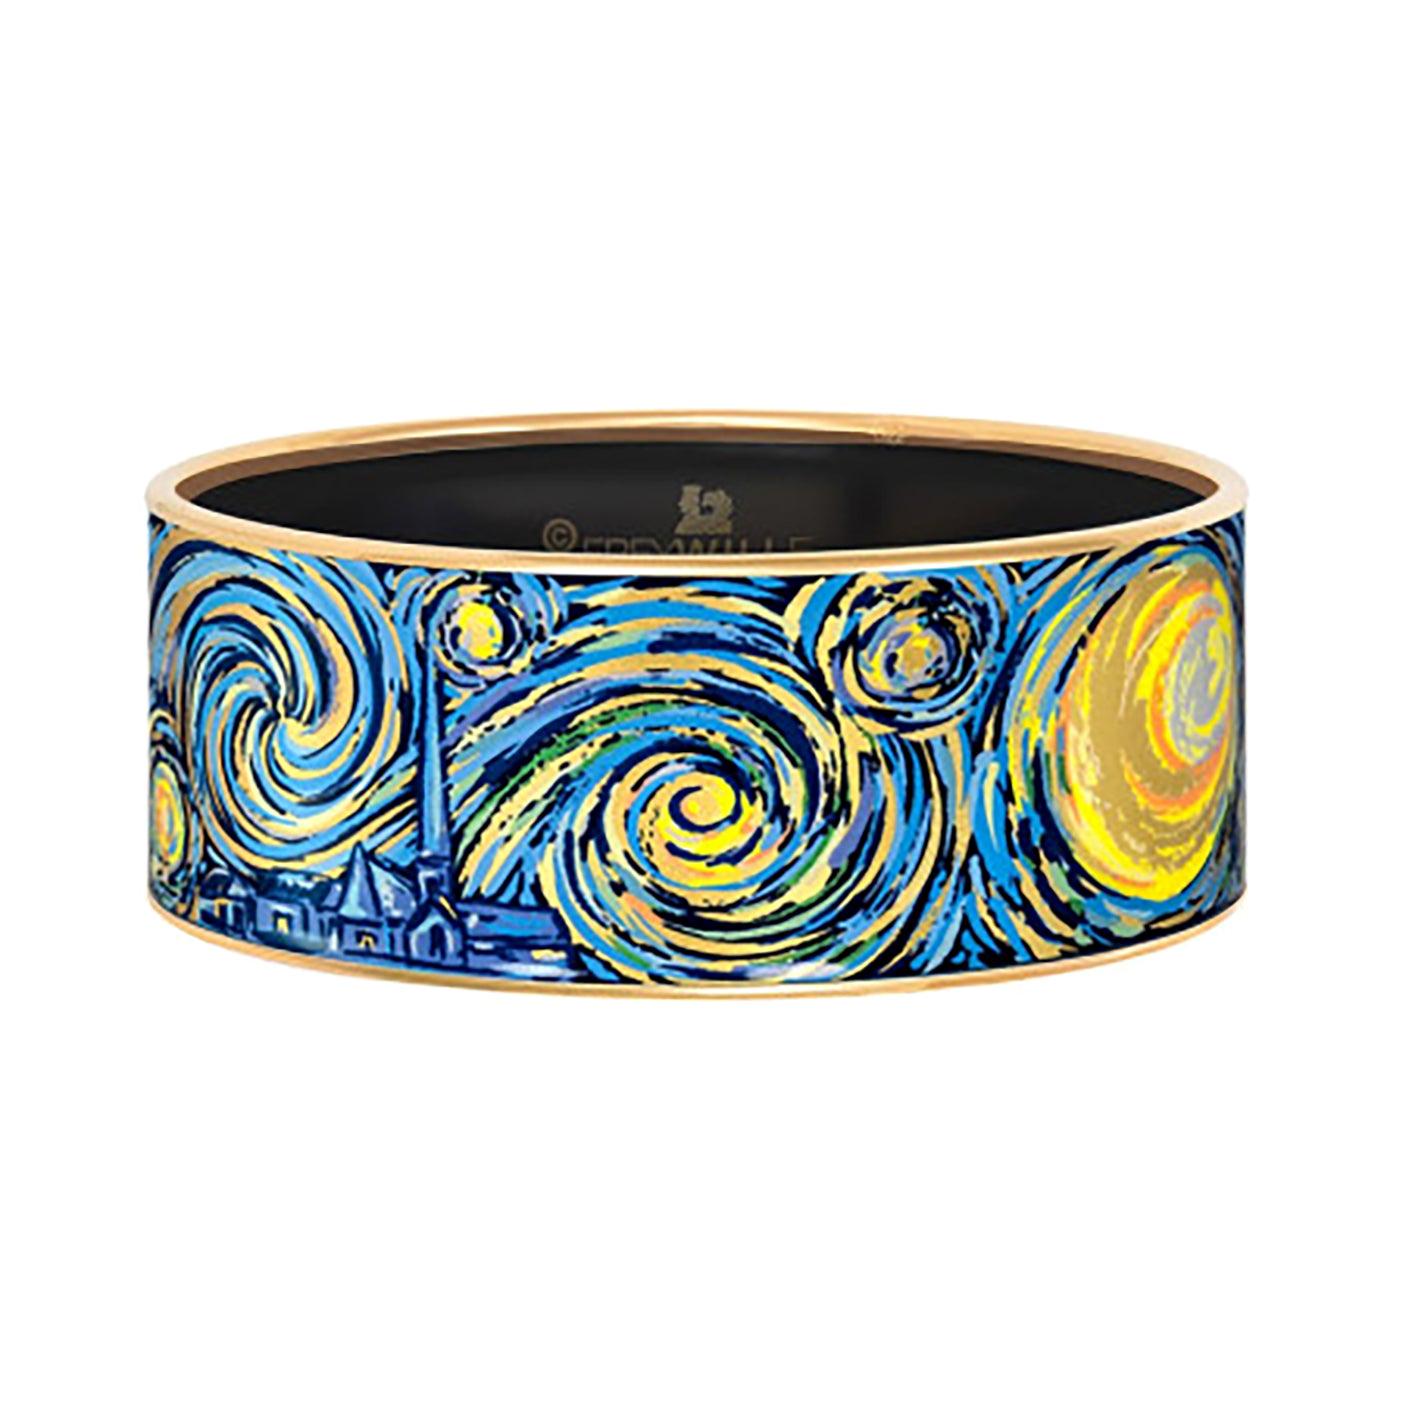 Cuff by Frey Wille 24kt gold plated enamel -  Hommage to Van Gogh